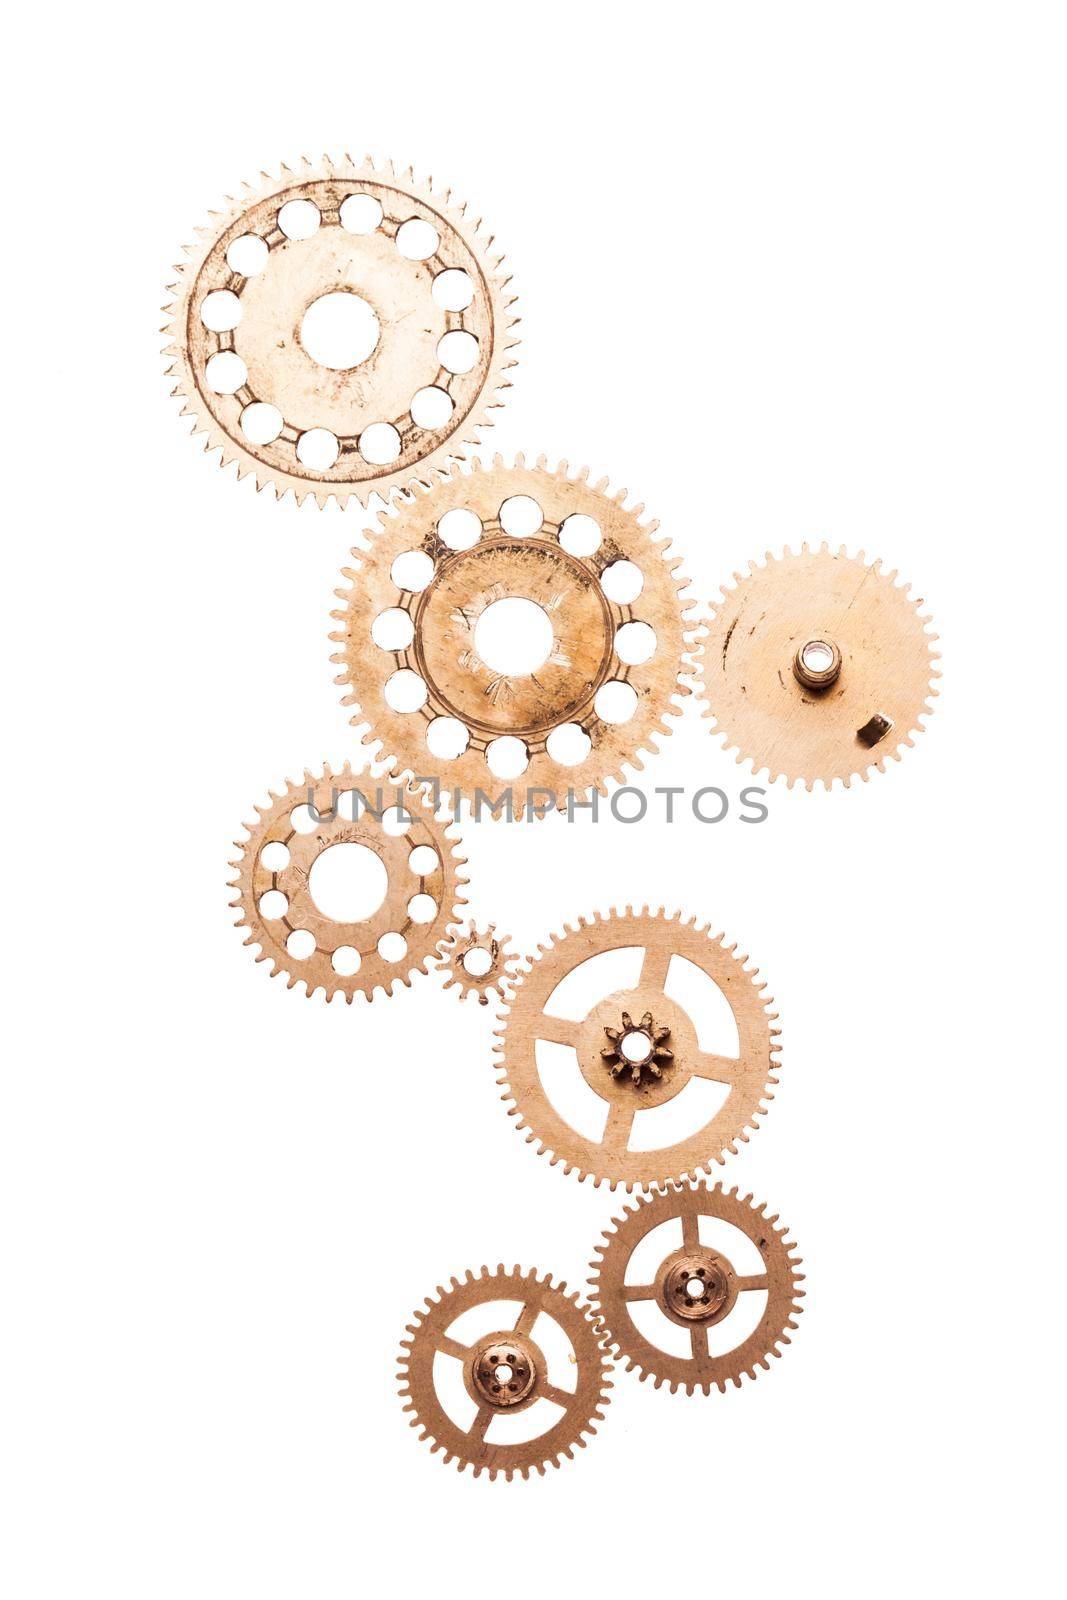 Steampunk details isolated on white. Mechanical clocks details, gears as a fantasy device